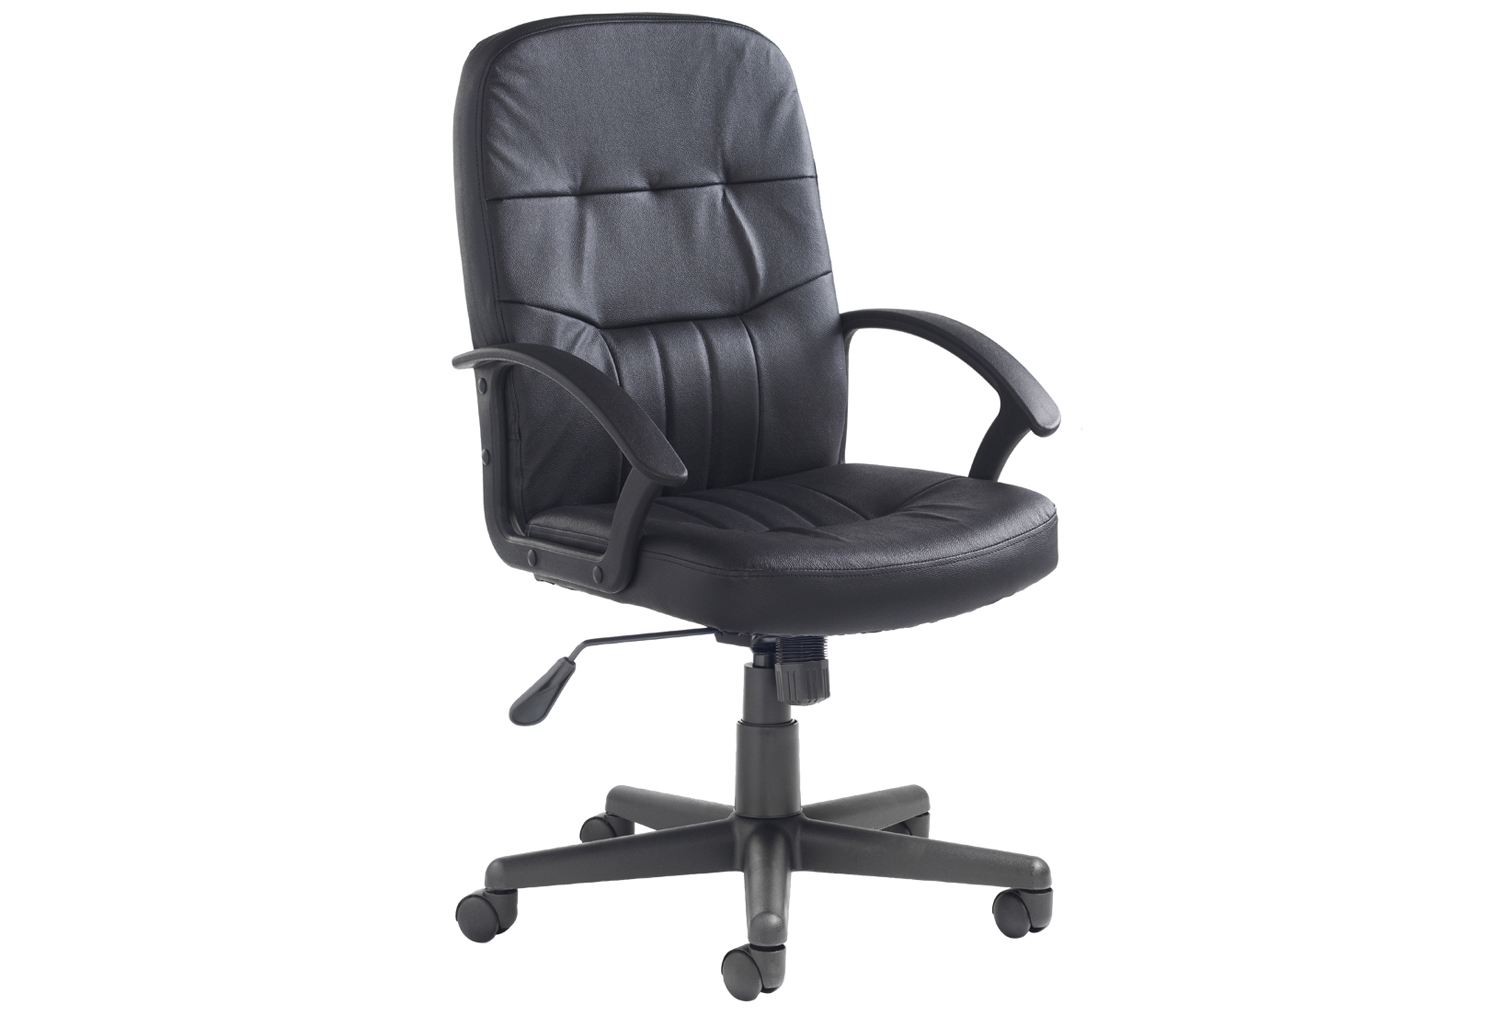 York High Back Leather Faced Executive Office Chair, Black, Express Delivery